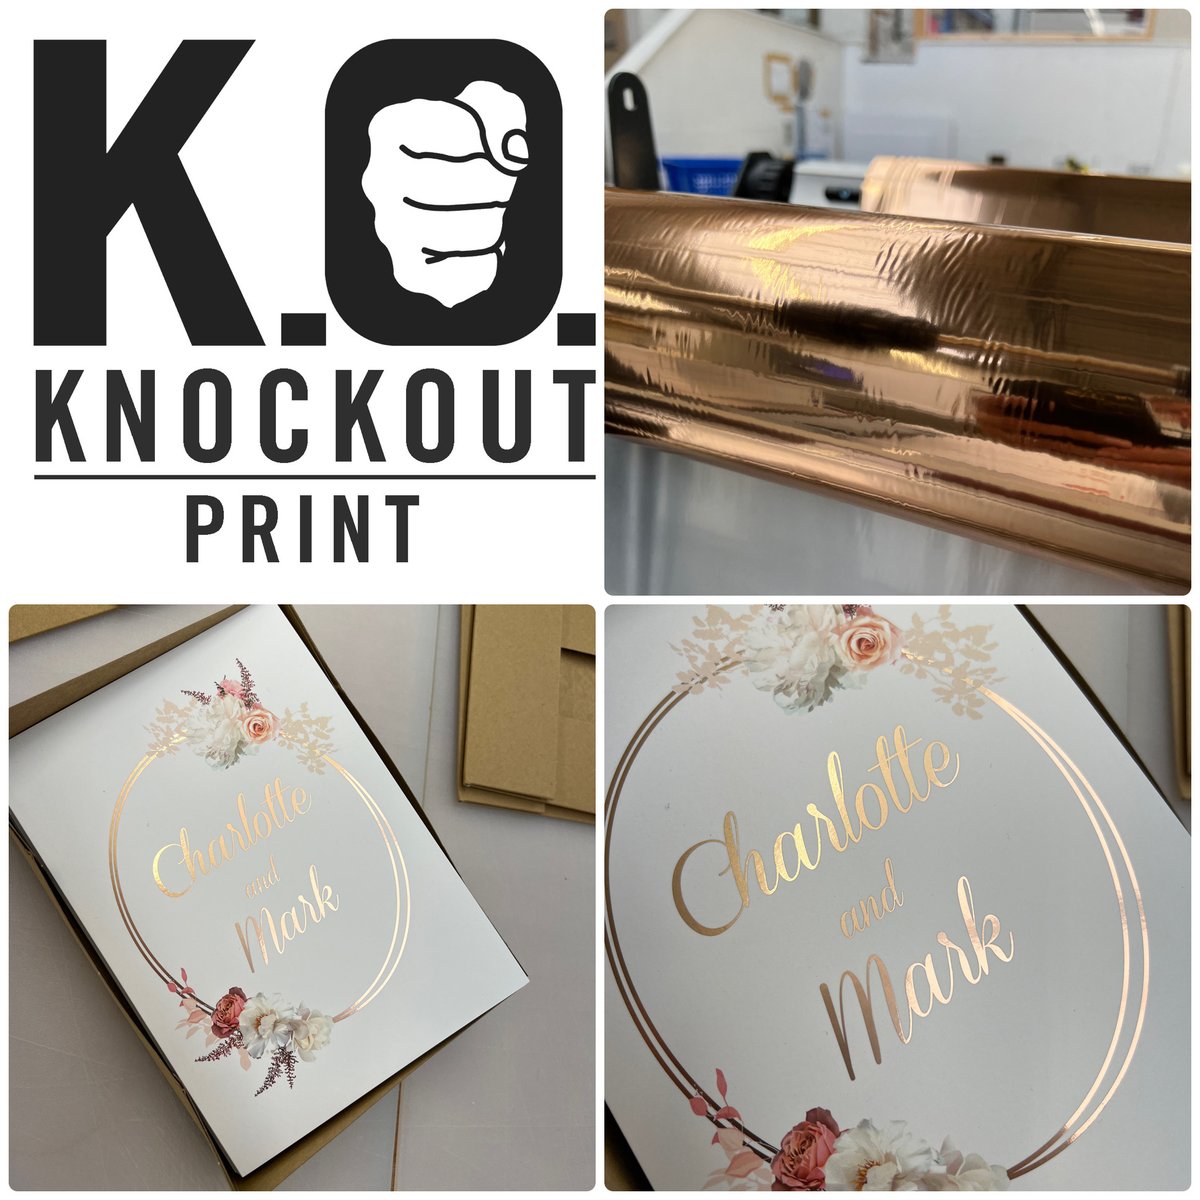 Planning a wedding in 2024? Check out this superb rose-gold foiled #weddingstationery printed recently by @knockoutprint!  #knockoutprint #printing #stationery #brochures #books #digitalprinting #leaflets #foilblocking #localprint knockoutprint.co.uk